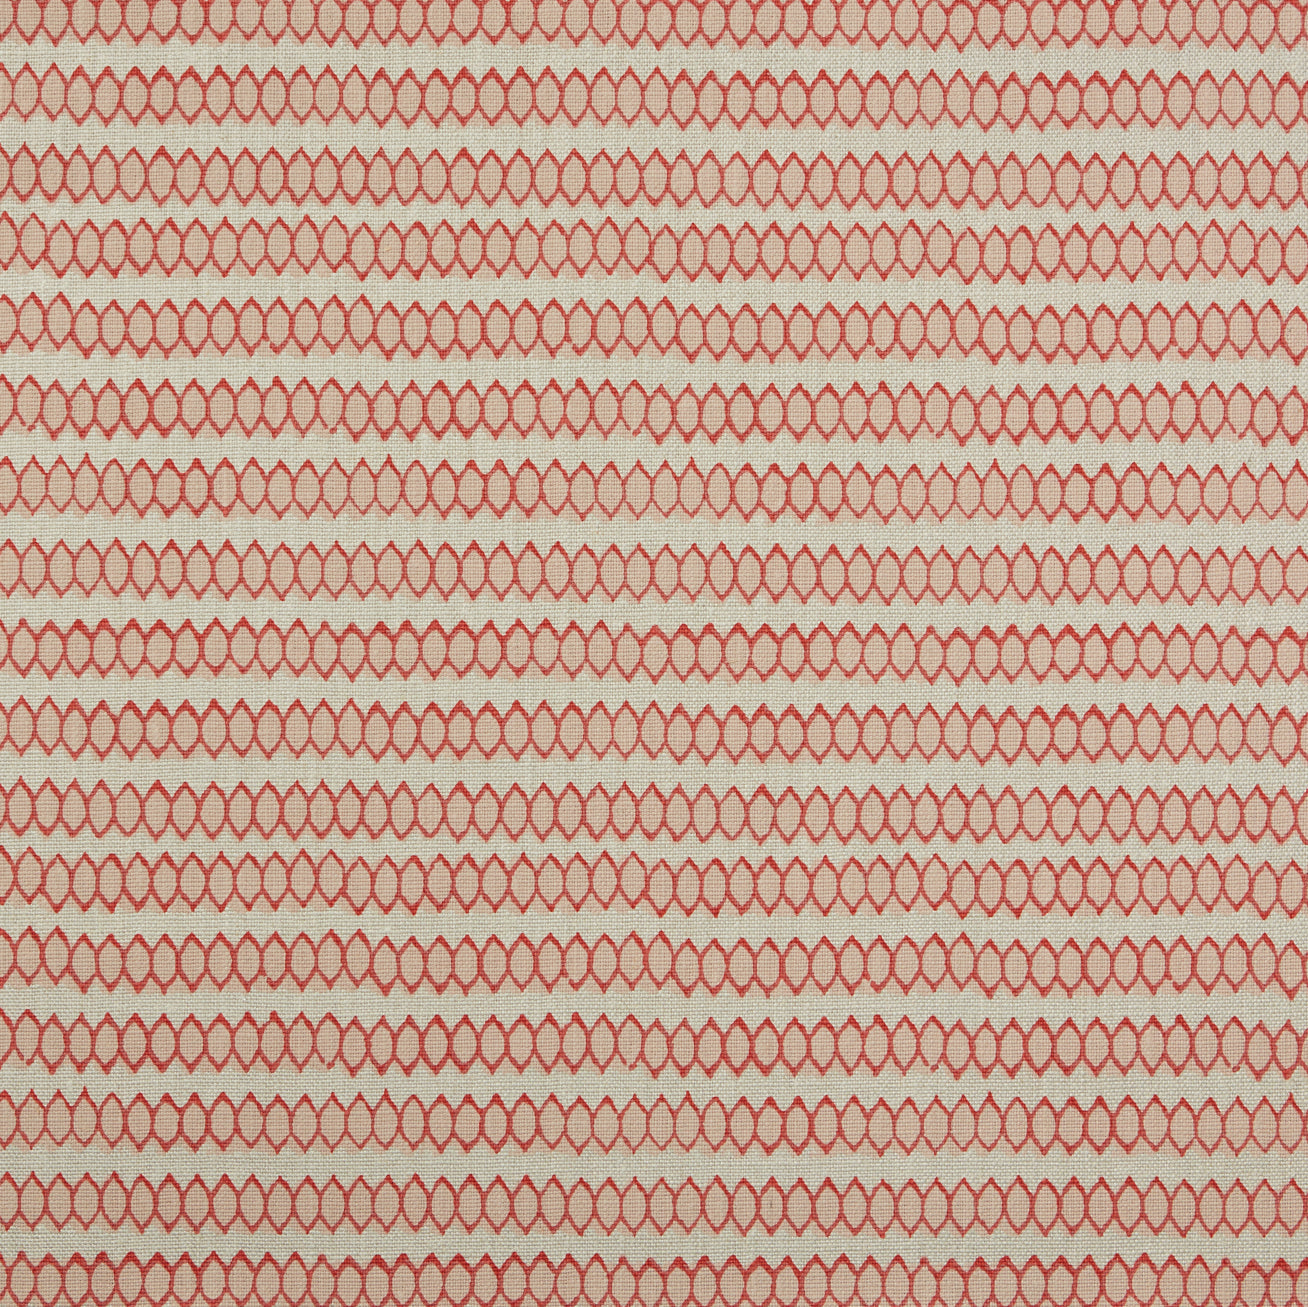 Swatch of fabric with rows of hand-drawn red and peach honeycomb shapes on a tan background.